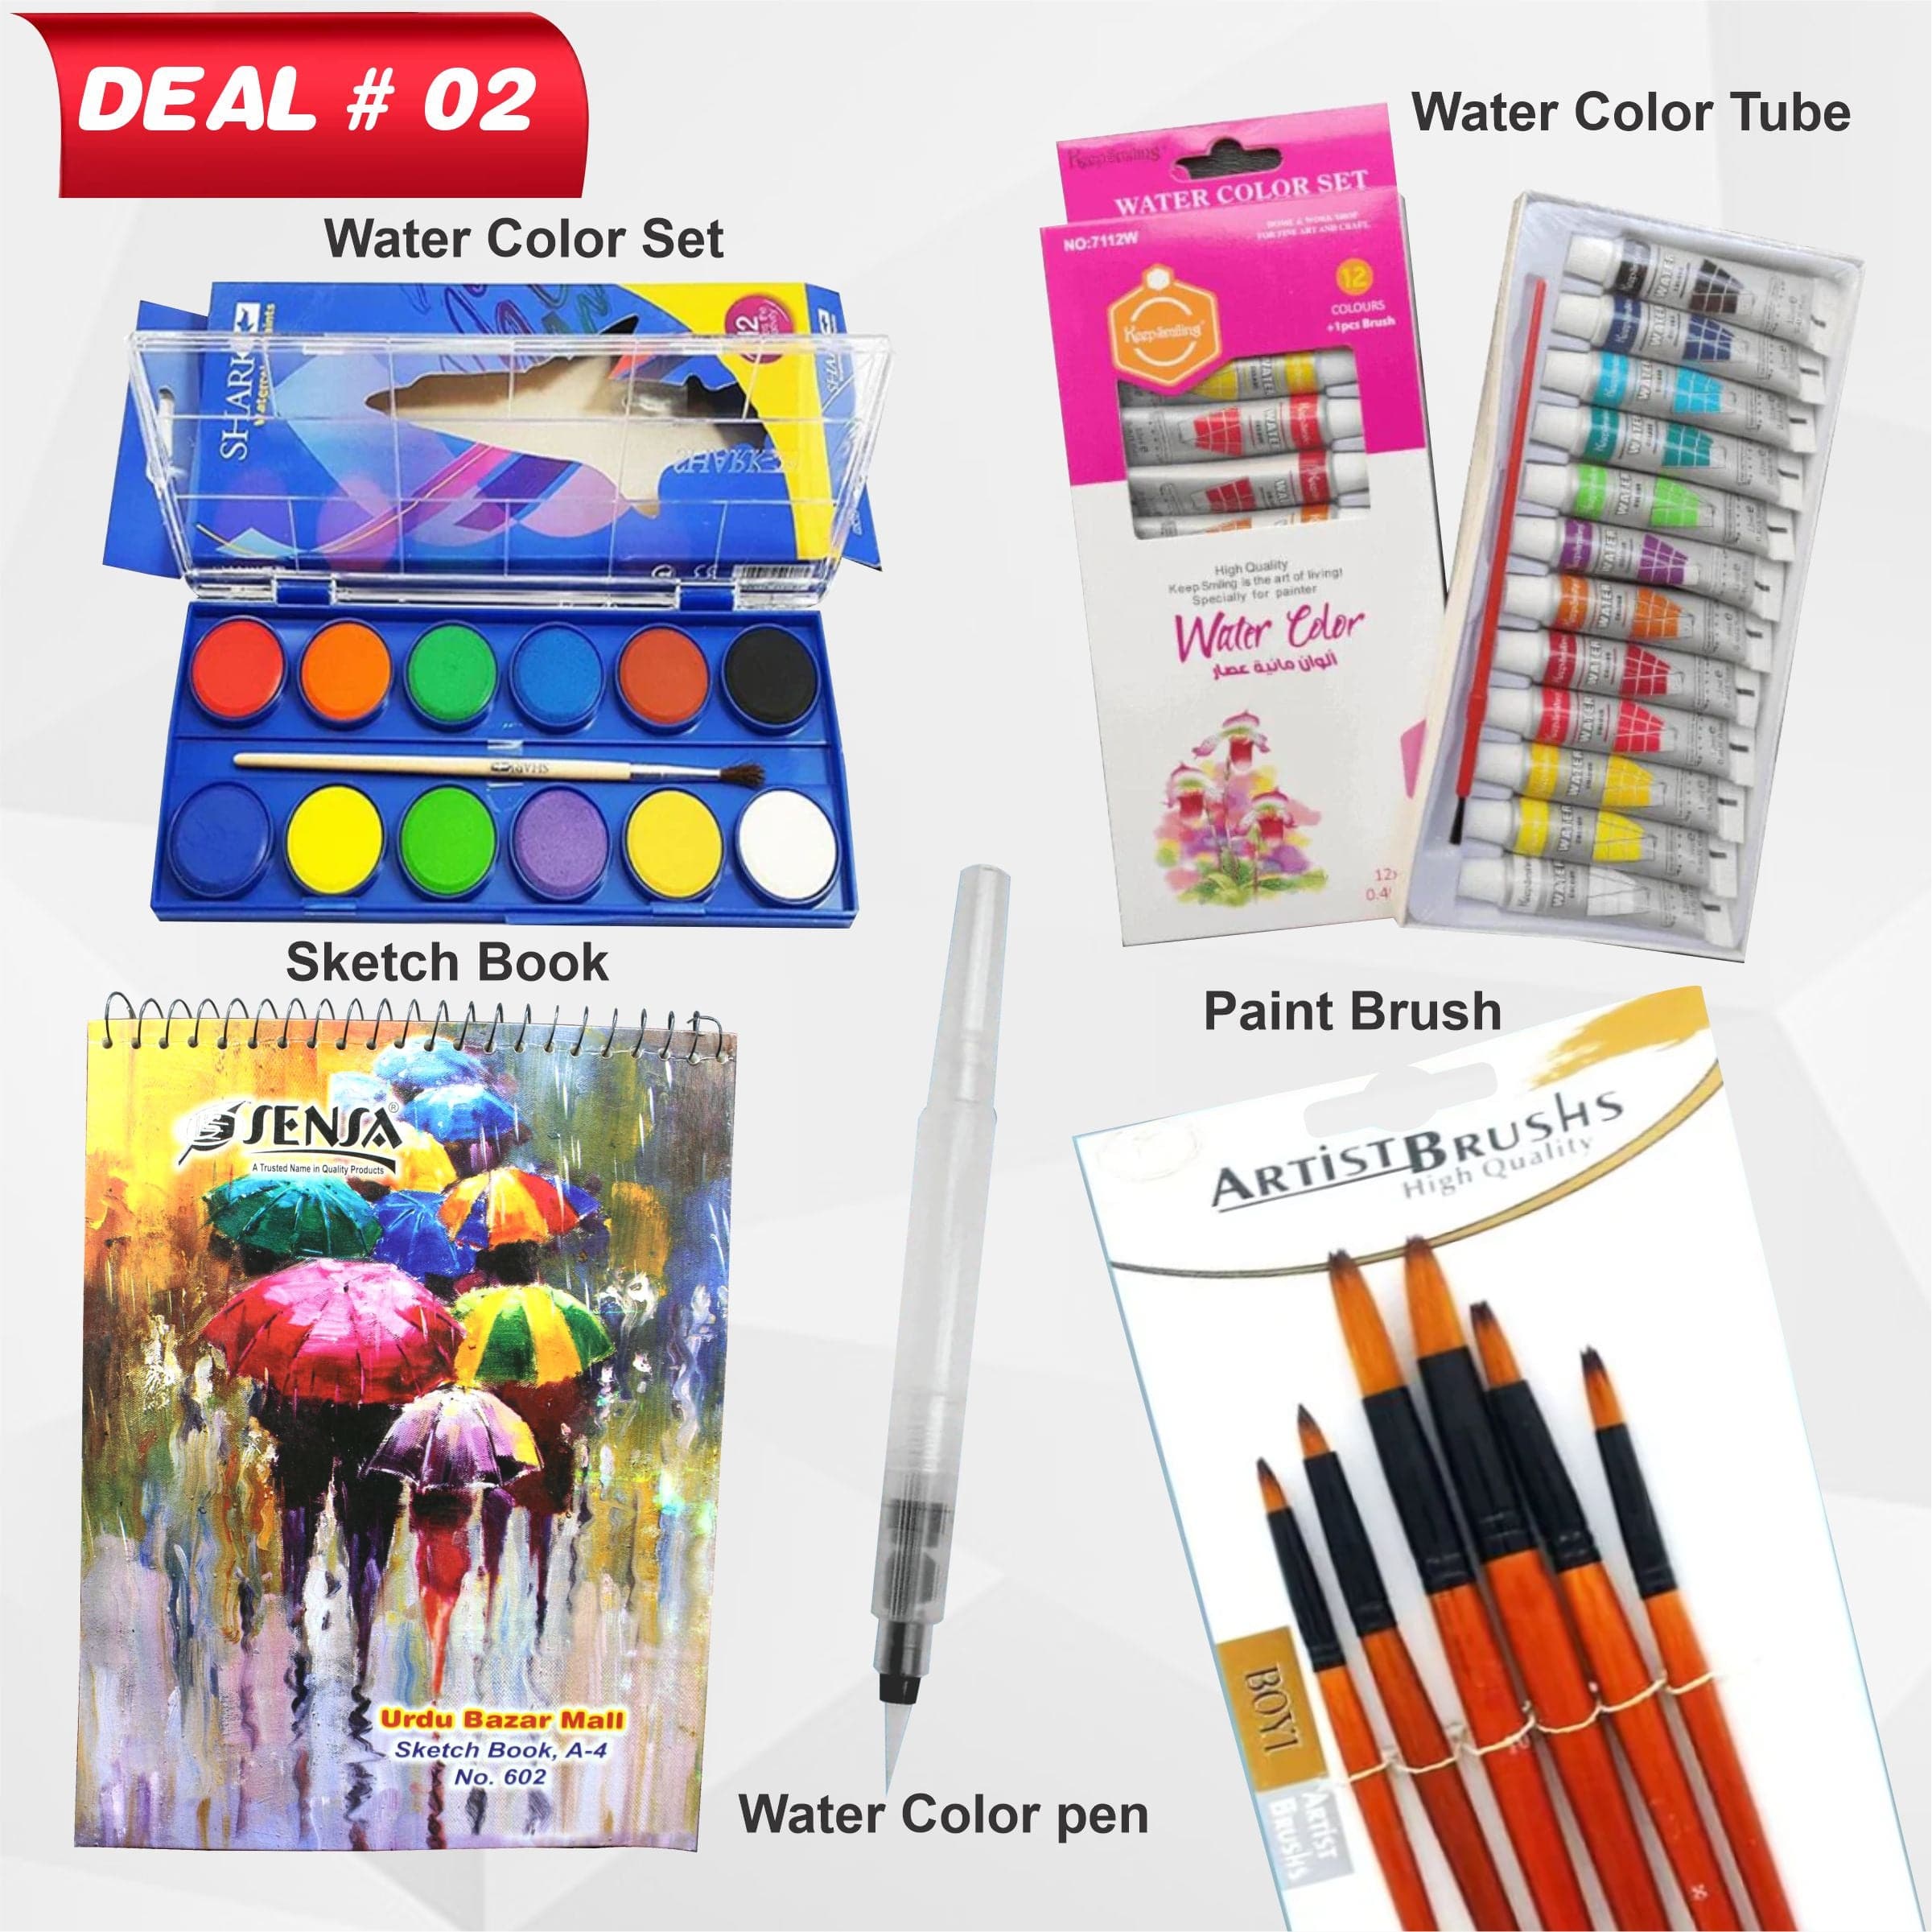 Water Color Painting Deal No. 2